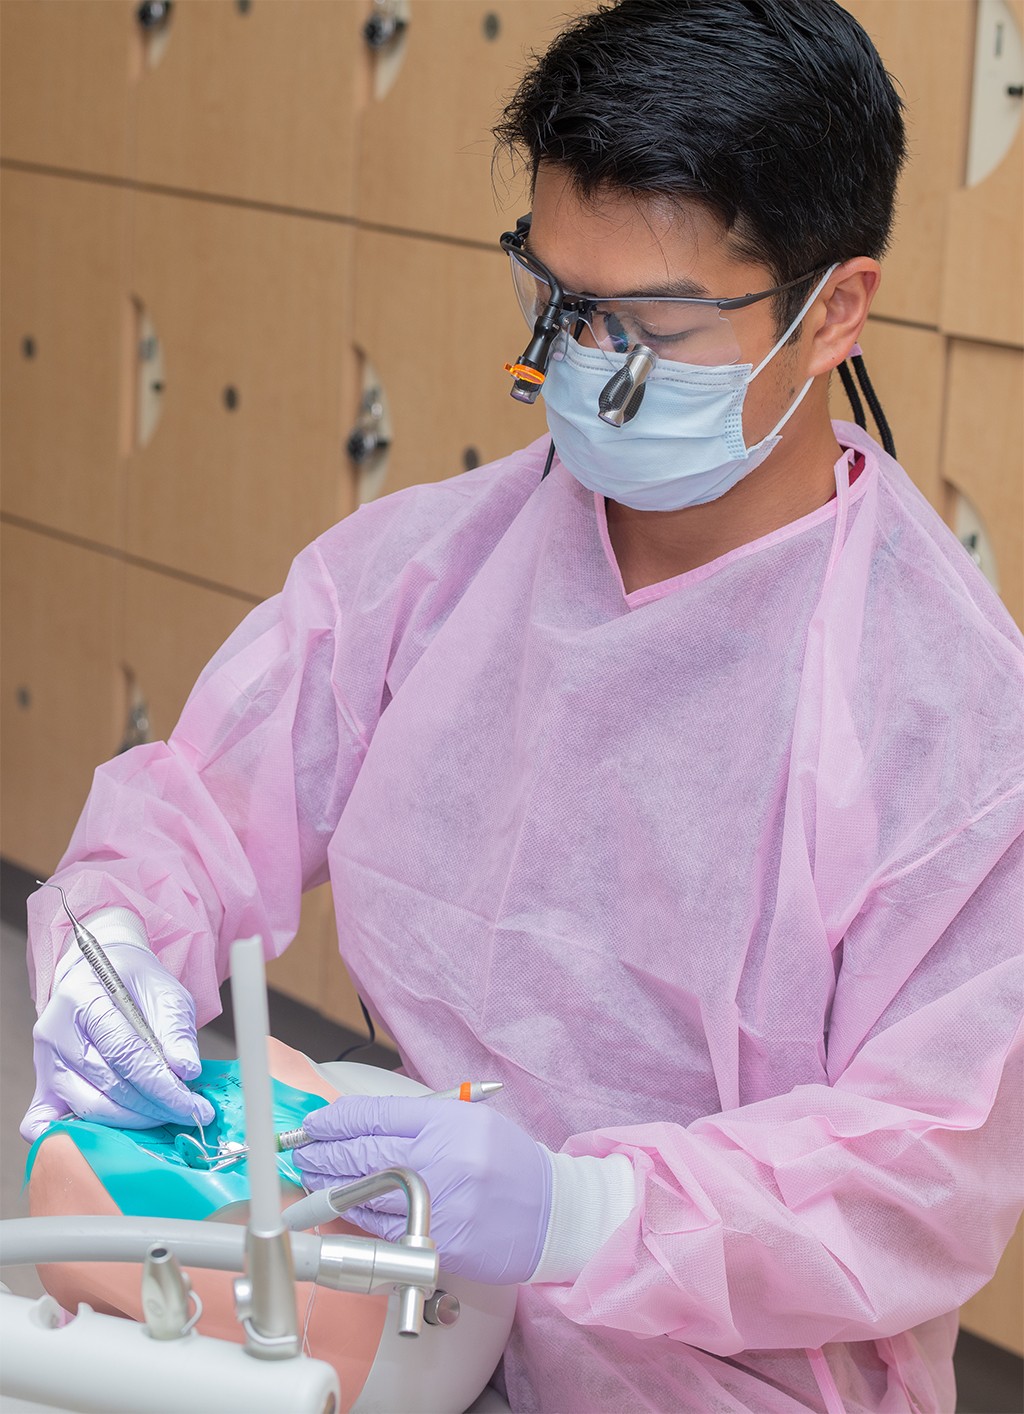 A dental medicince student wearing pink scrubs practicing skills in the Oral Health Center